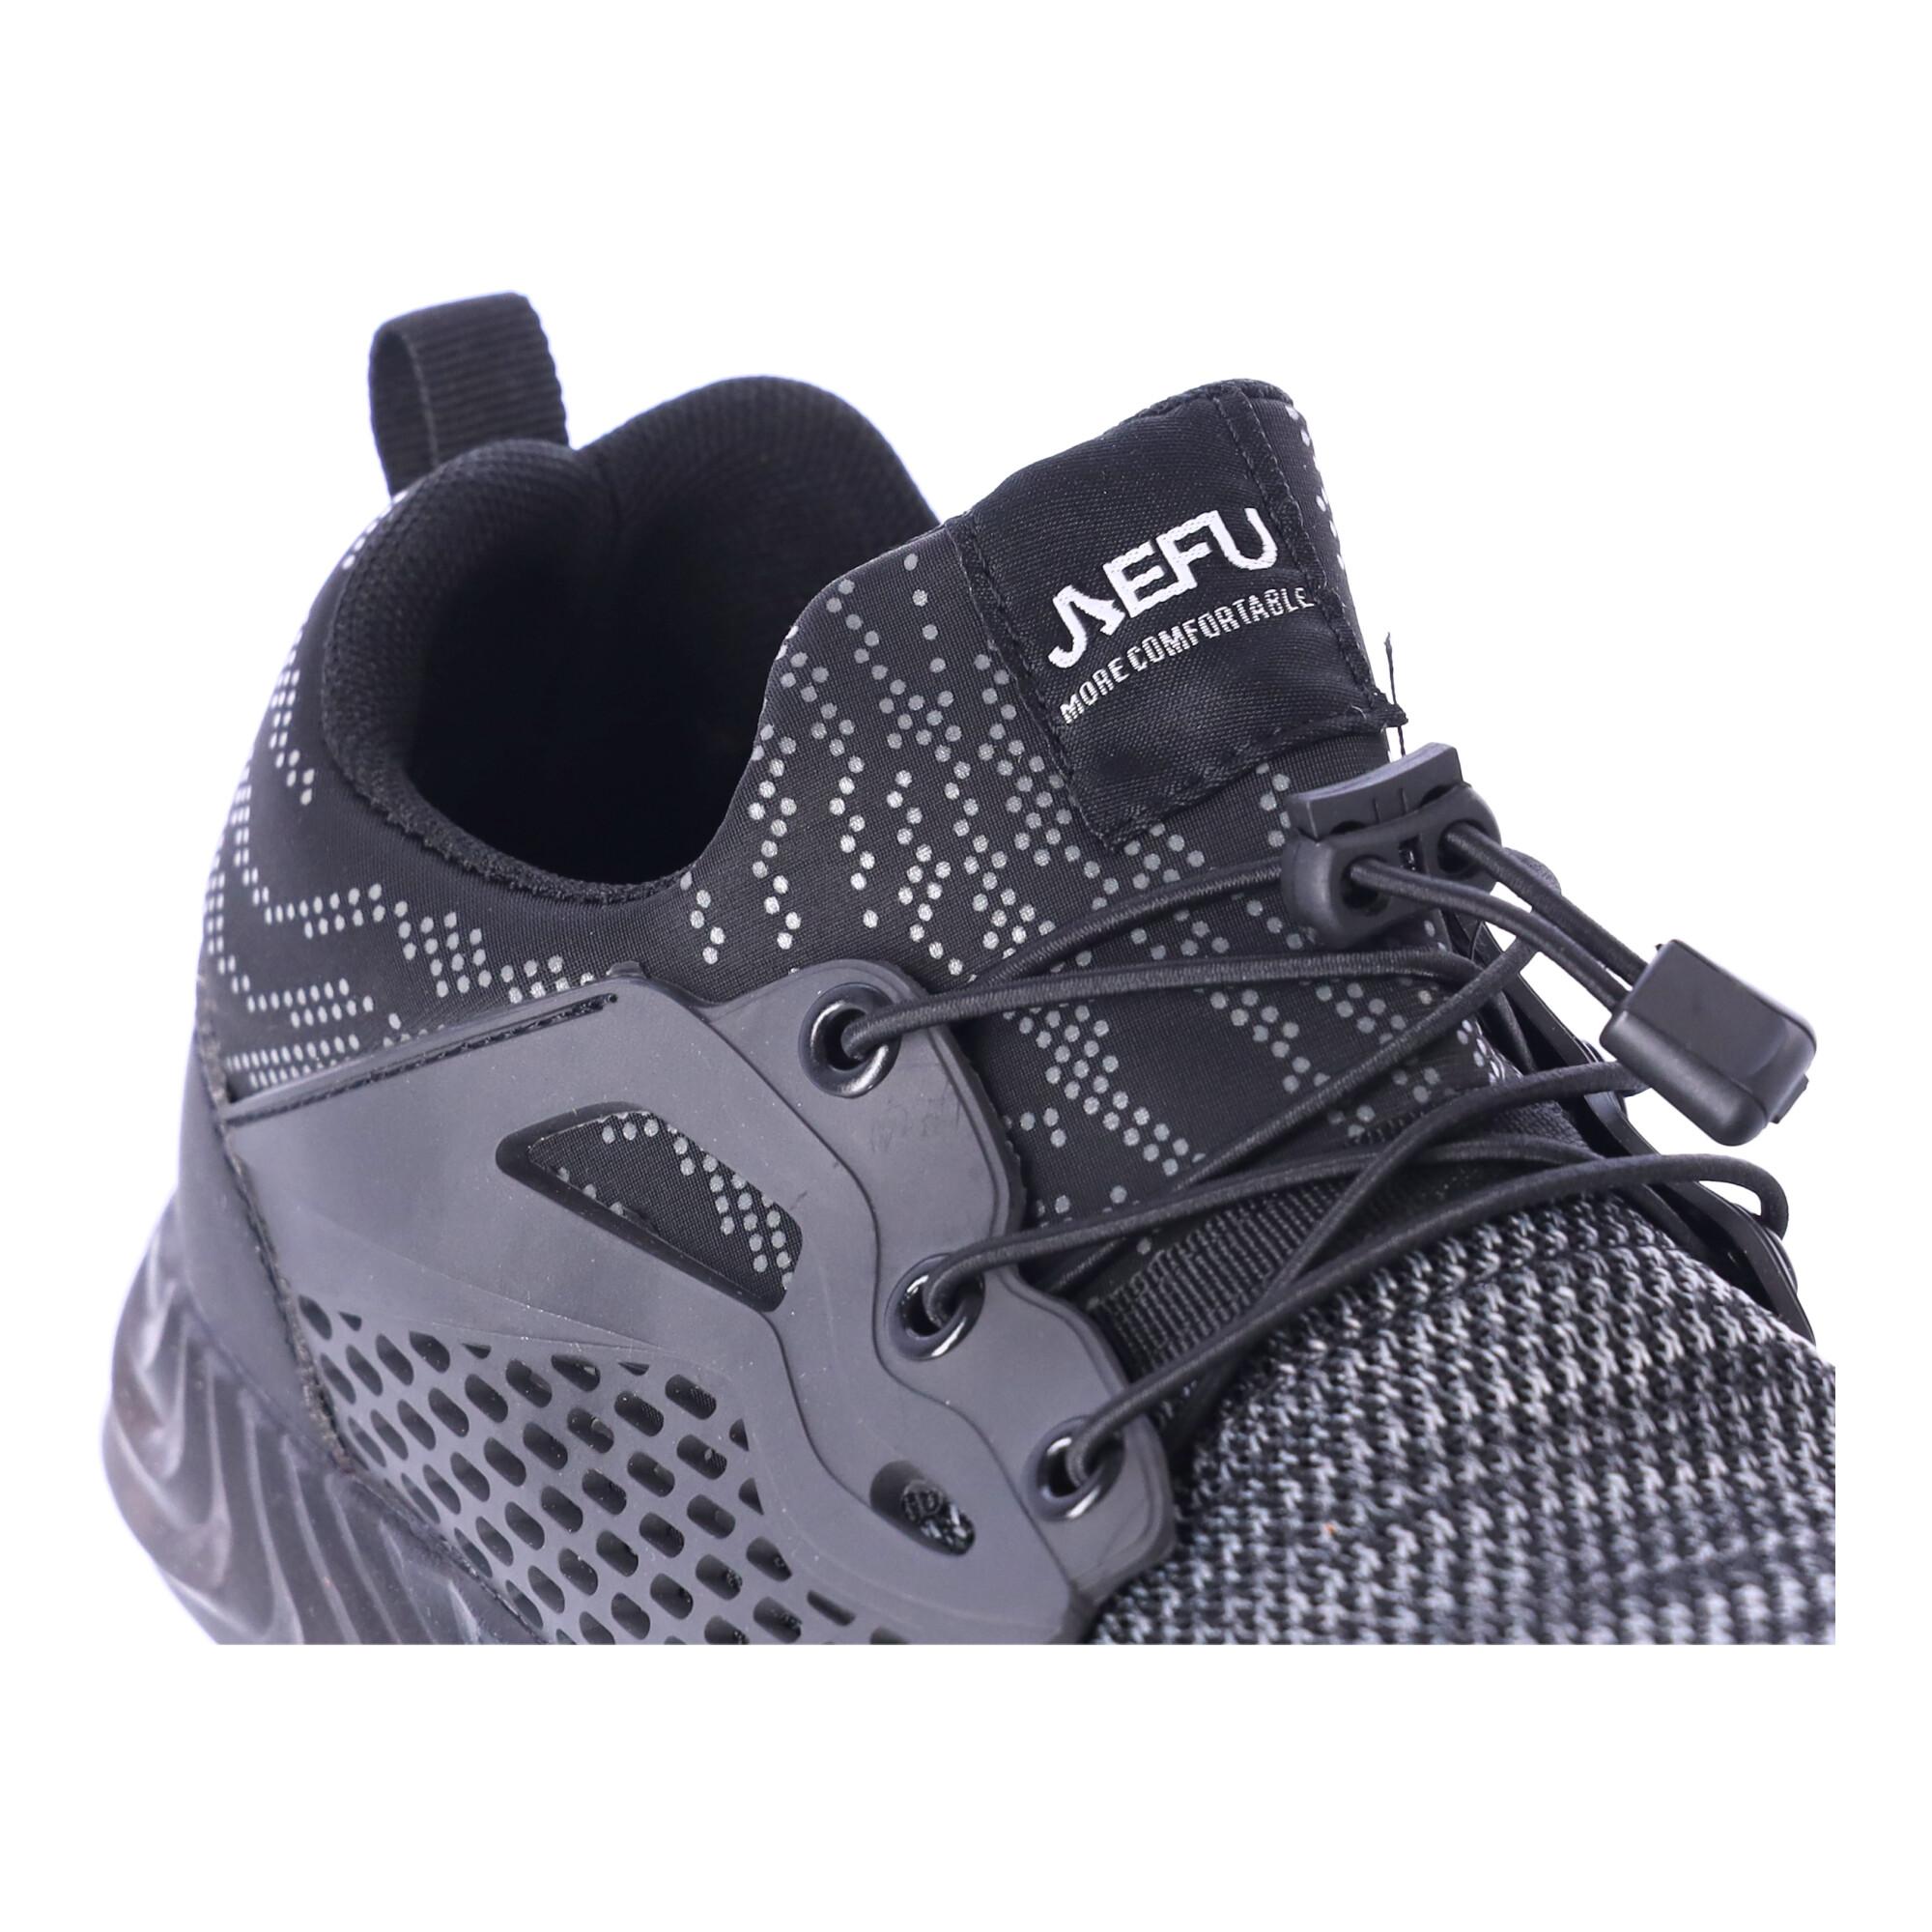 Work safety shoes "44" - gray